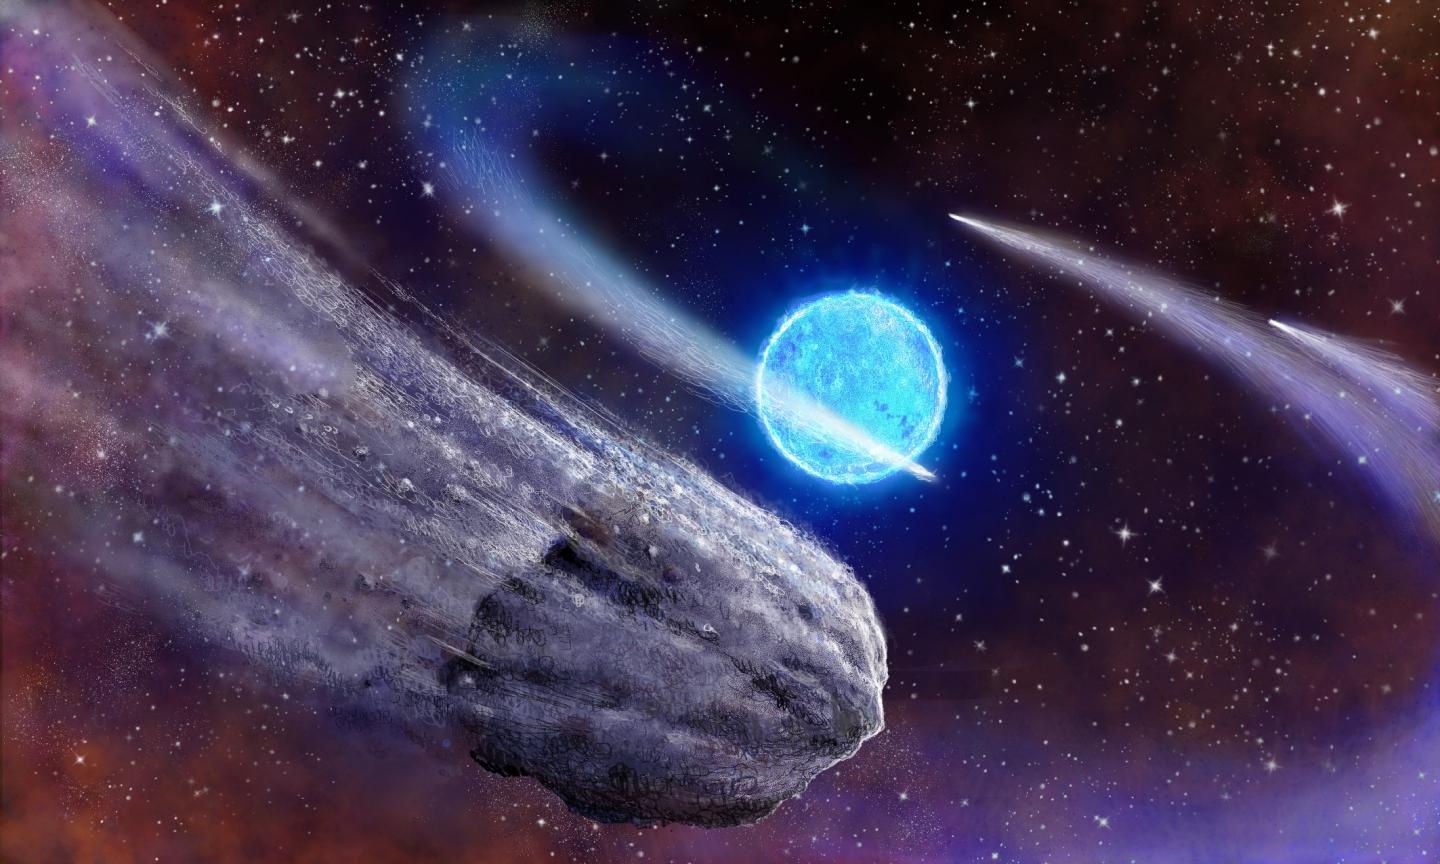 Artist's Impression of the Comet Passing a Distant Star